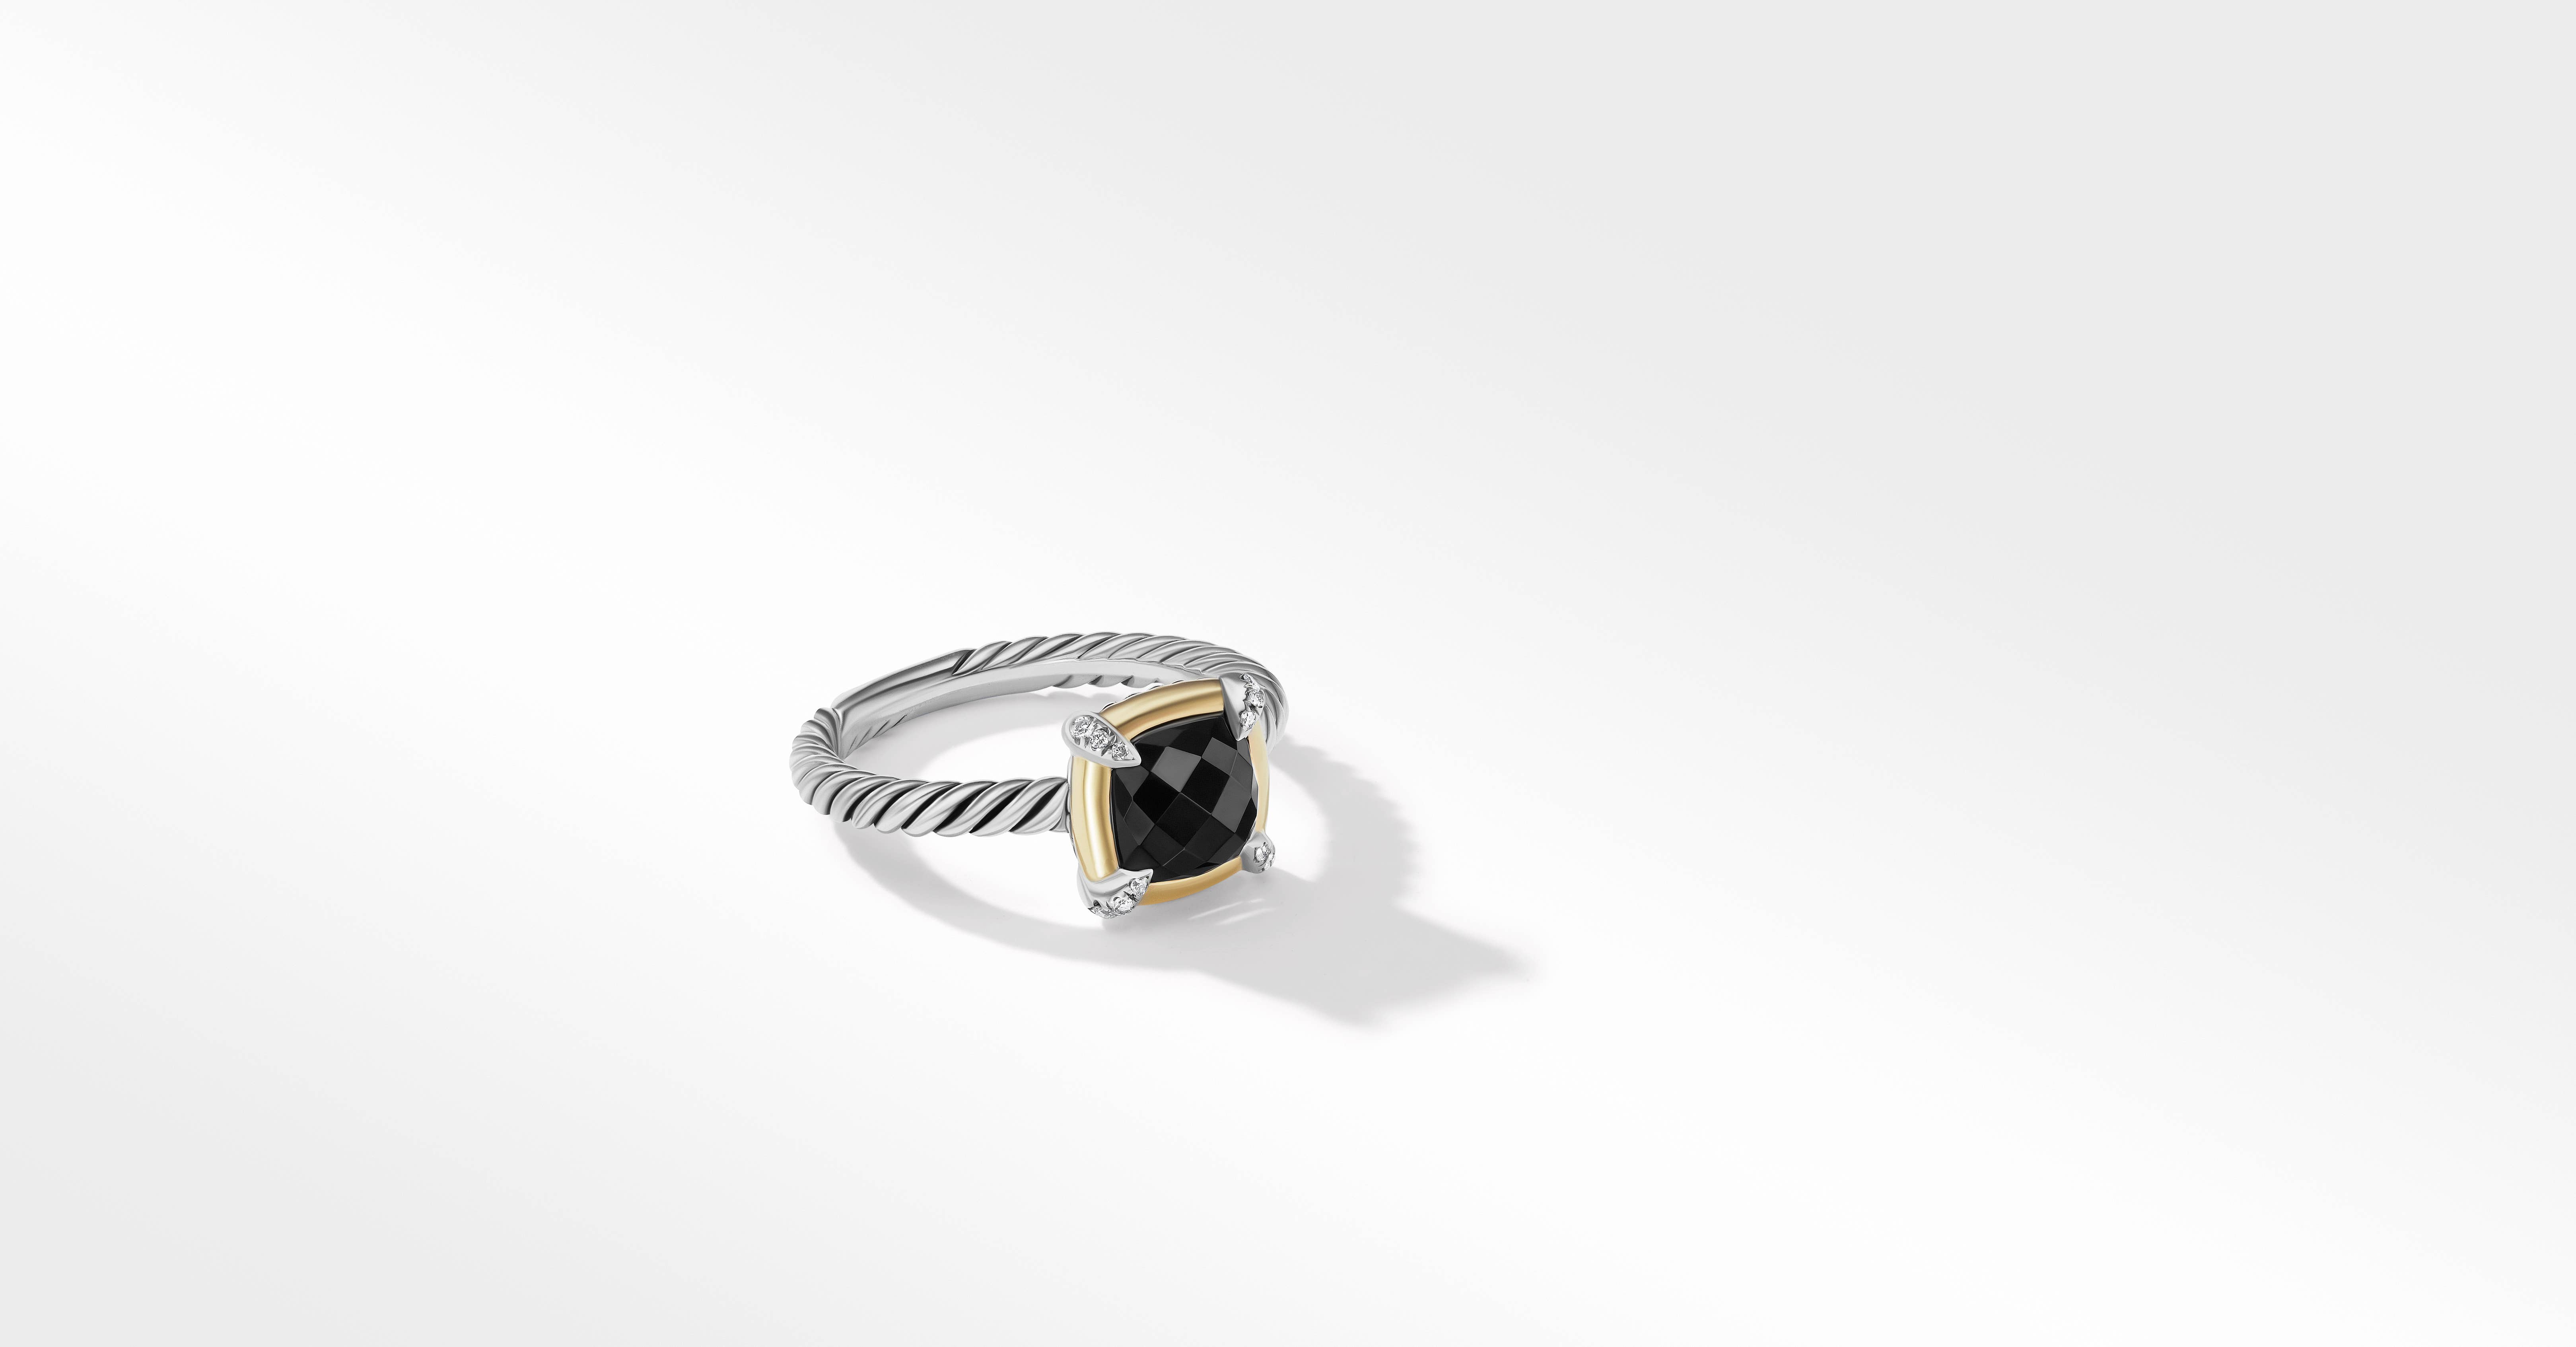 Petite Chatelaine® Ring in Sterling Silver with Black Onyx, 18K Yellow Gold  and Pavé Diamonds David Yurman